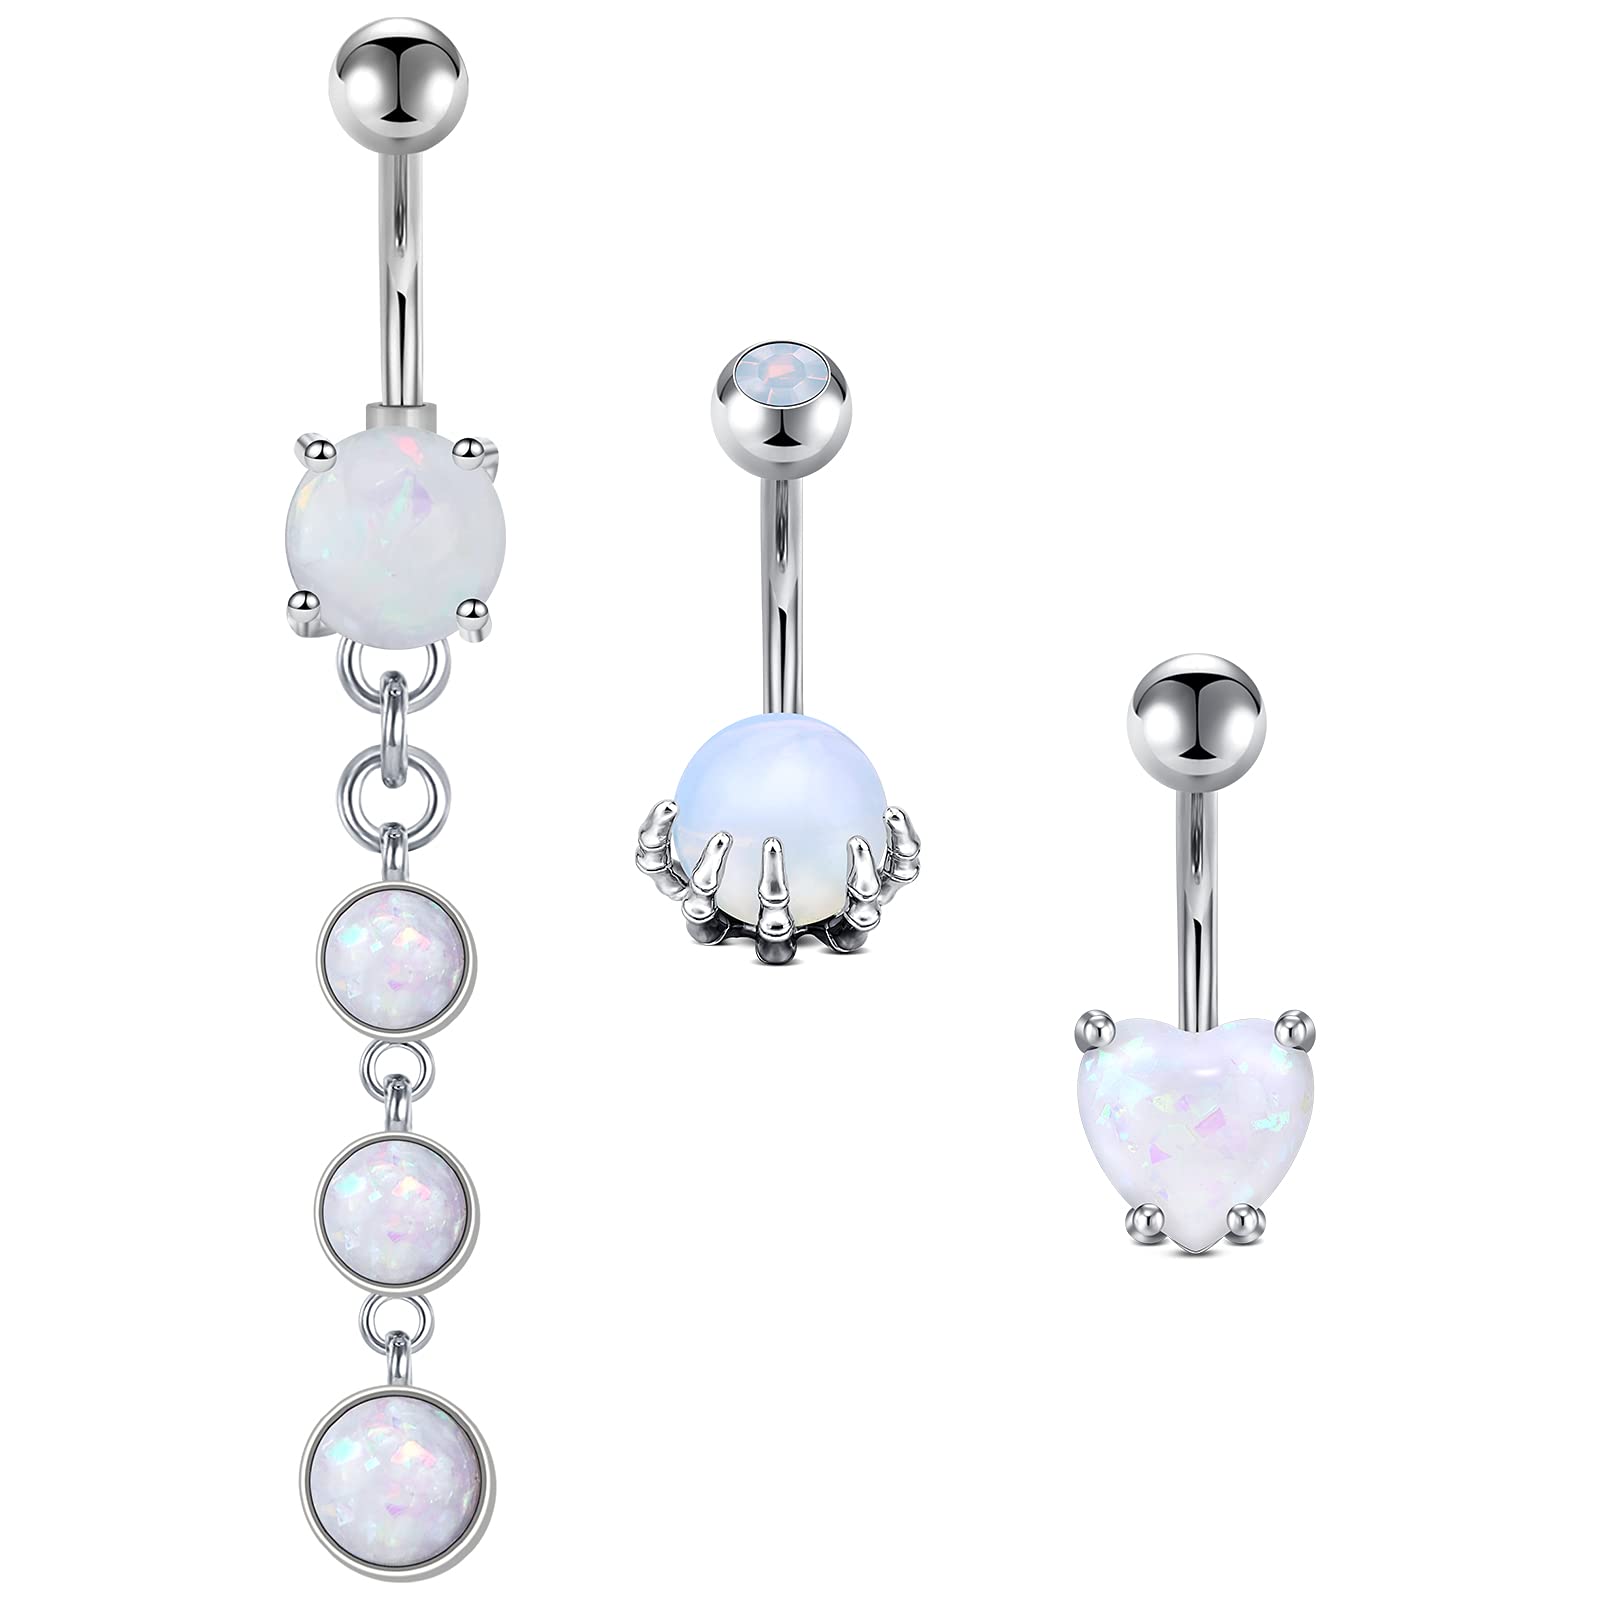 Funseedrr 3pcs Belly Button Bars Surgical Steel 14G 10mm Navel Rings Dangly Belly Piercing Bar